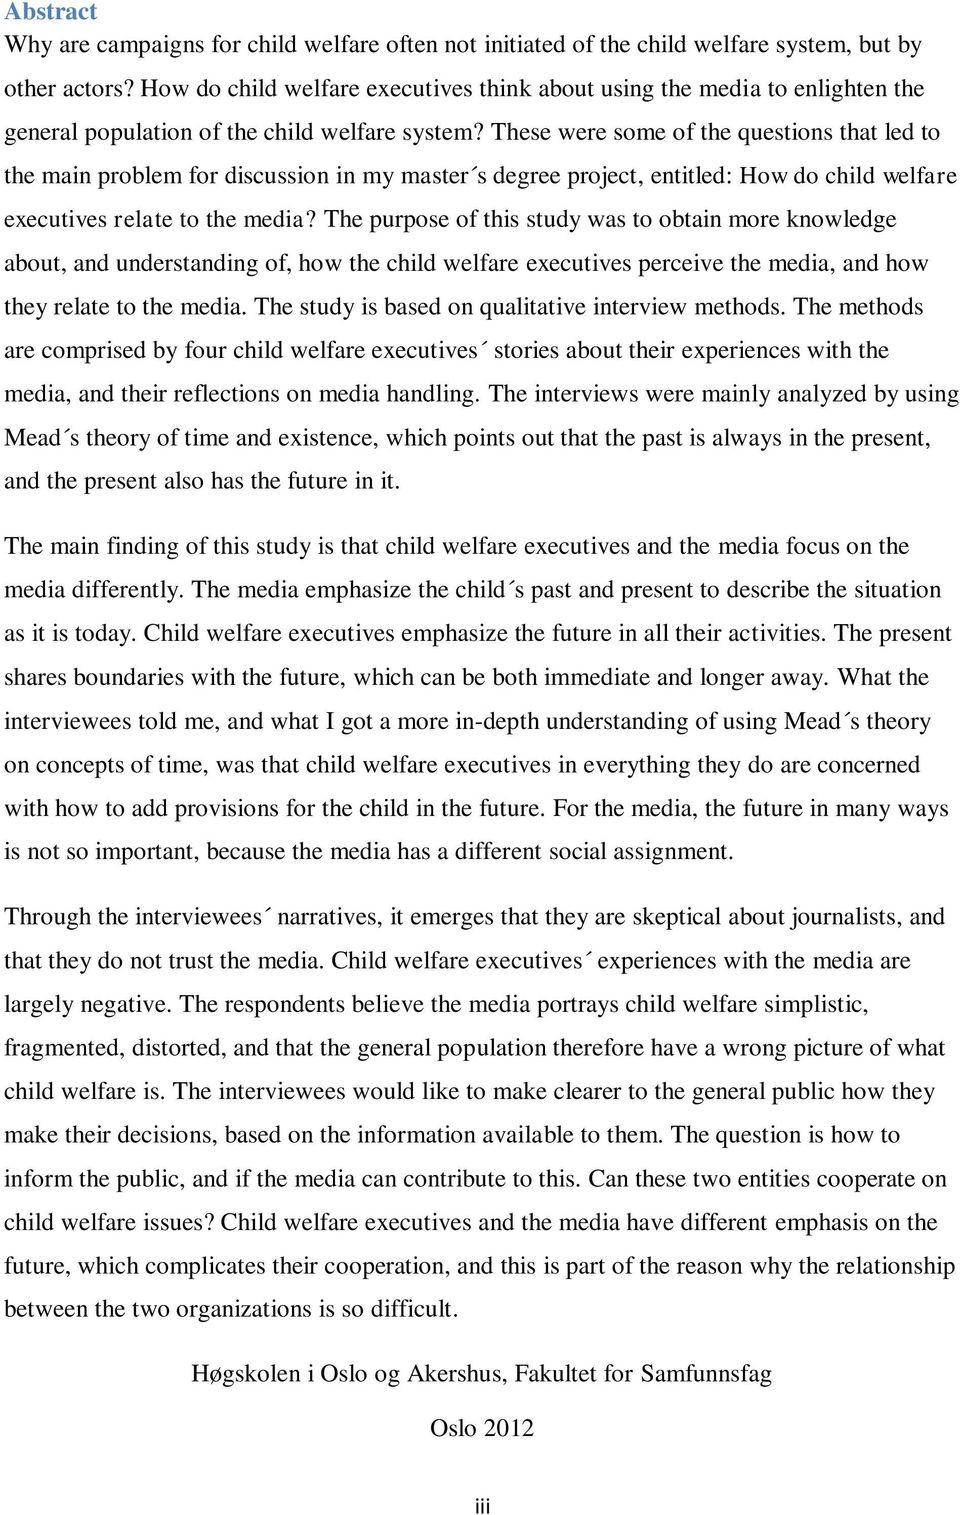 These were some of the questions that led to the main problem for discussion in my master s degree project, entitled: How do child welfare executives relate to the media?